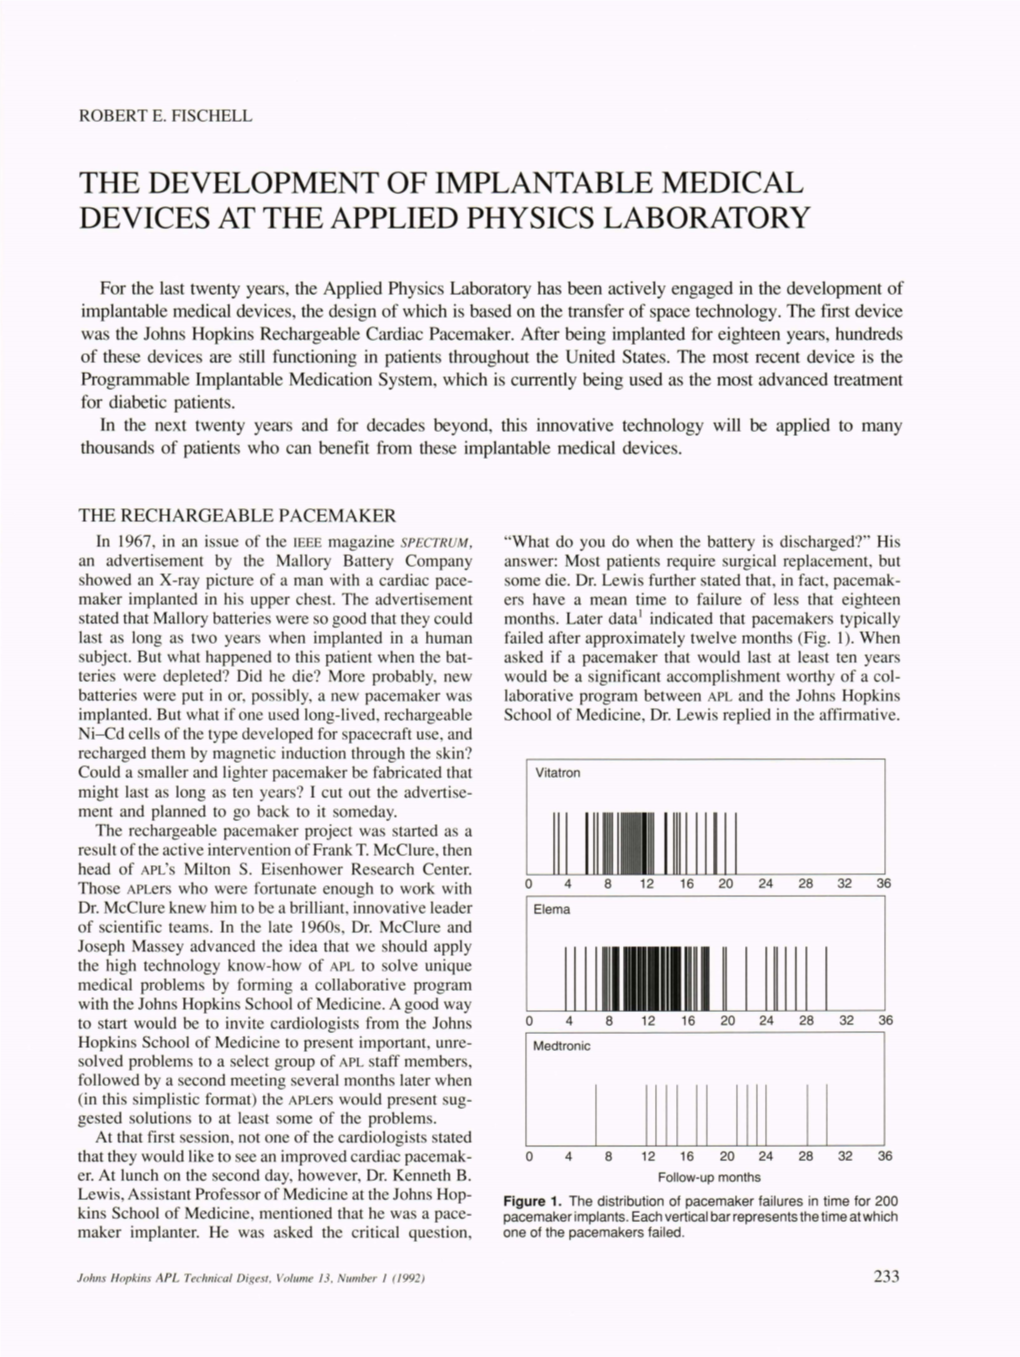 The Development of Implantable Medical Devices at the Applied Physics Laboratory